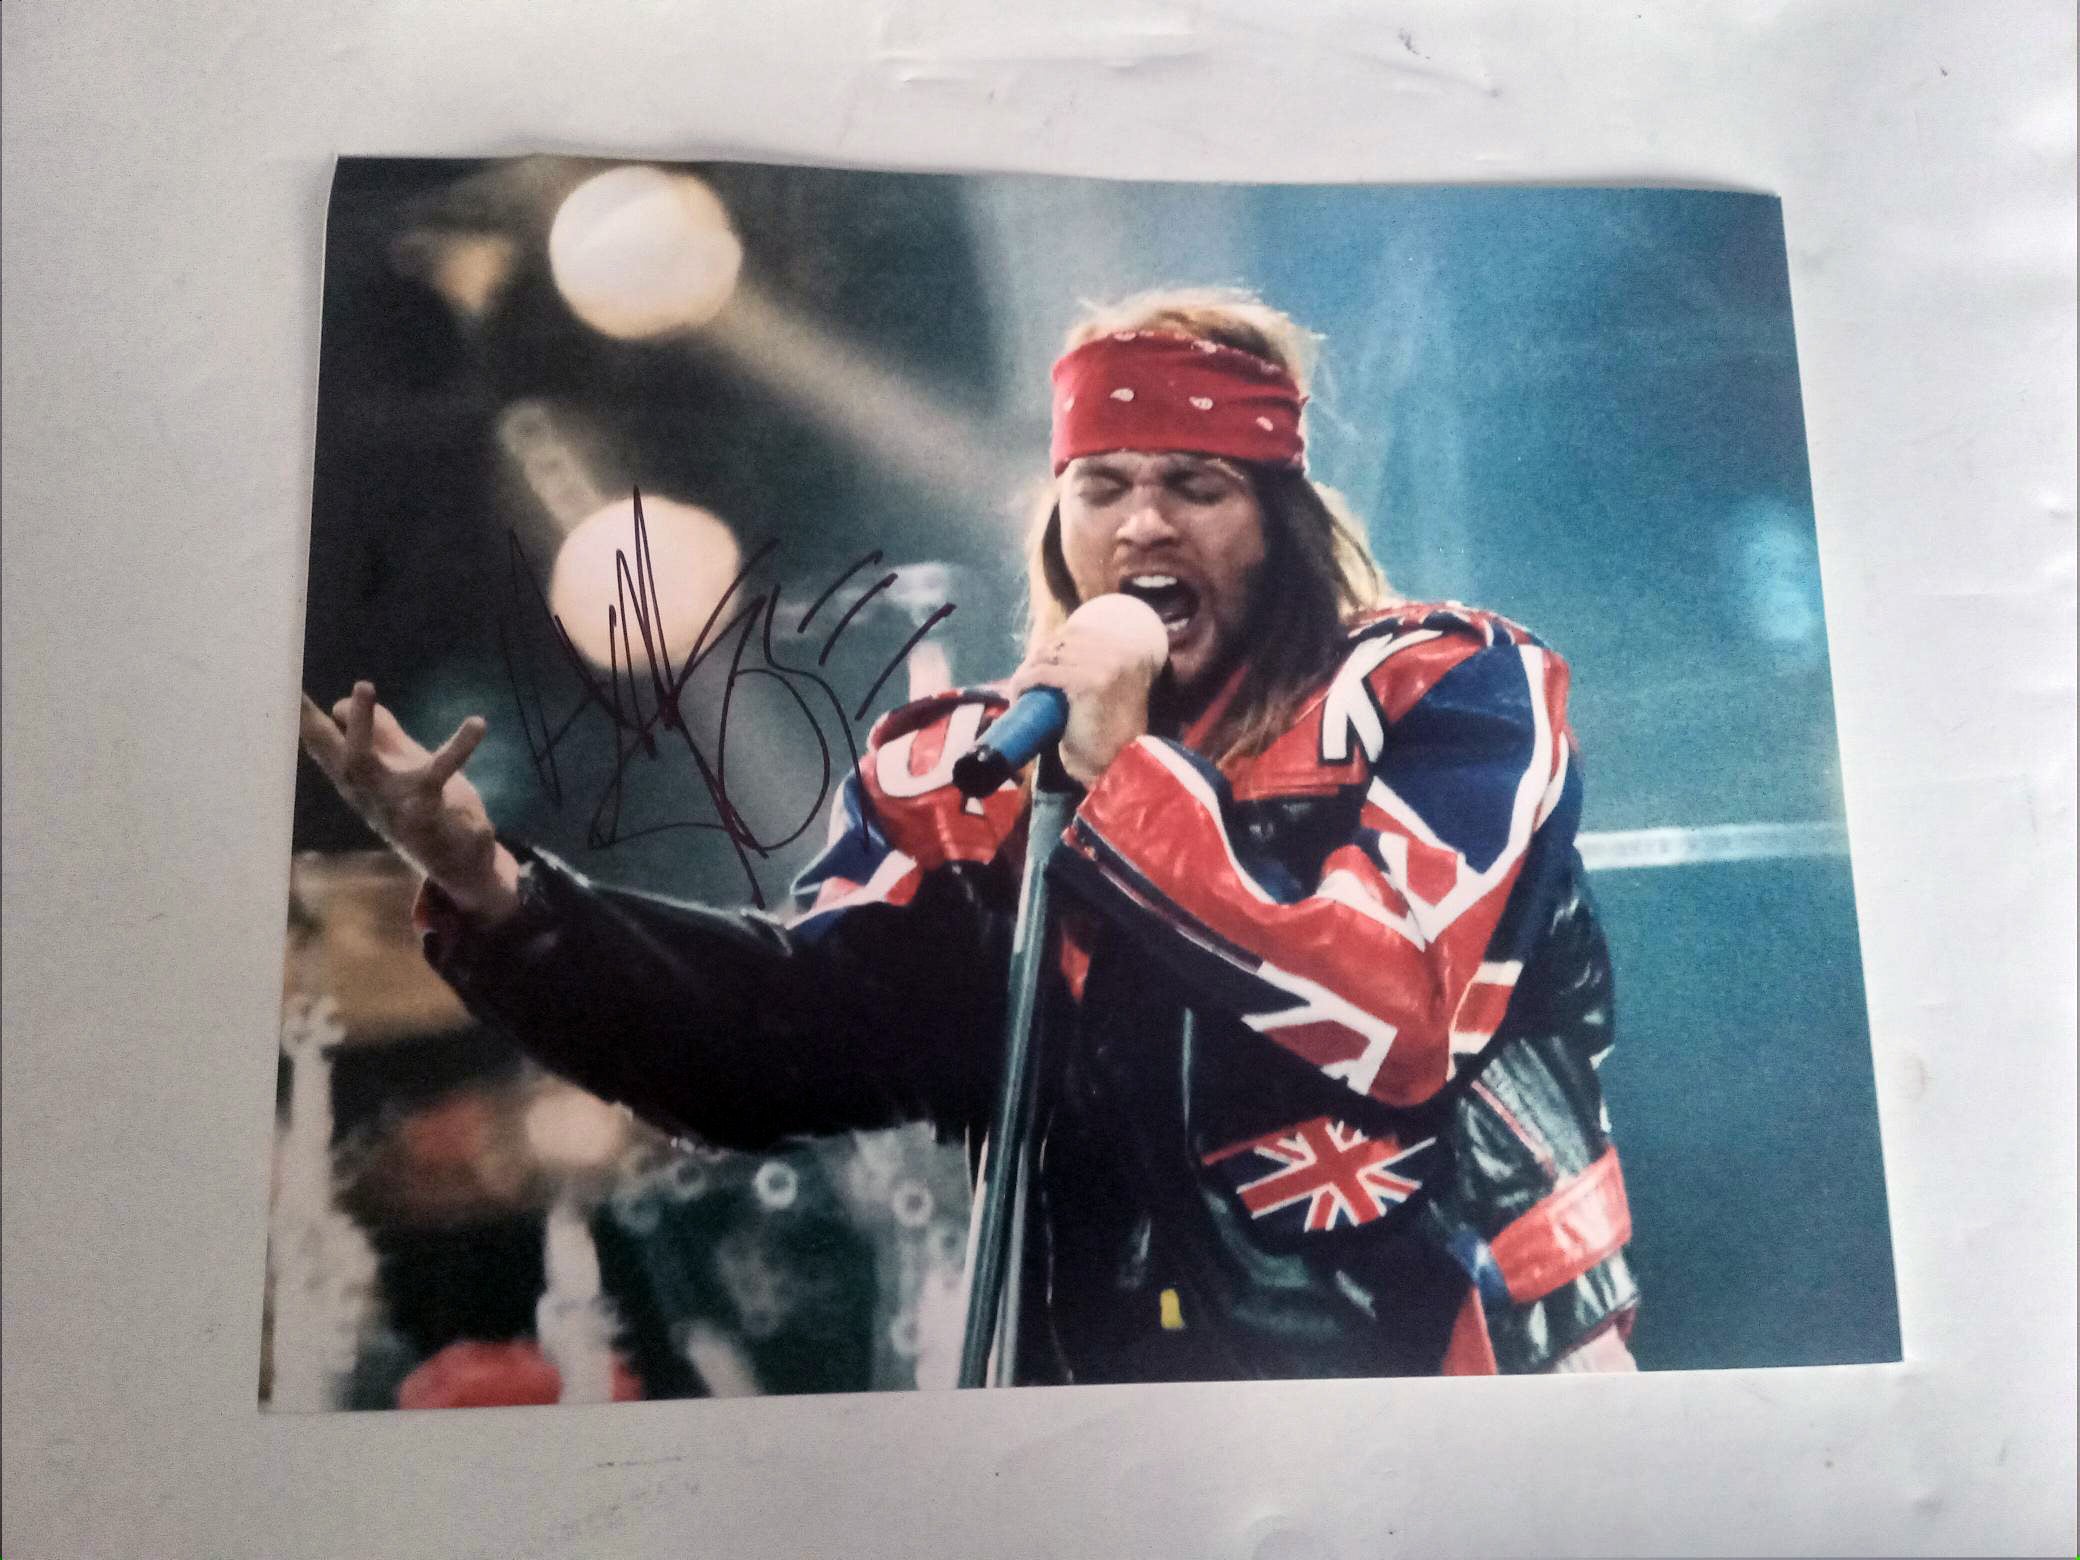 W. Axl Rose Guns N Roses 8 x 10 photo signed with proof